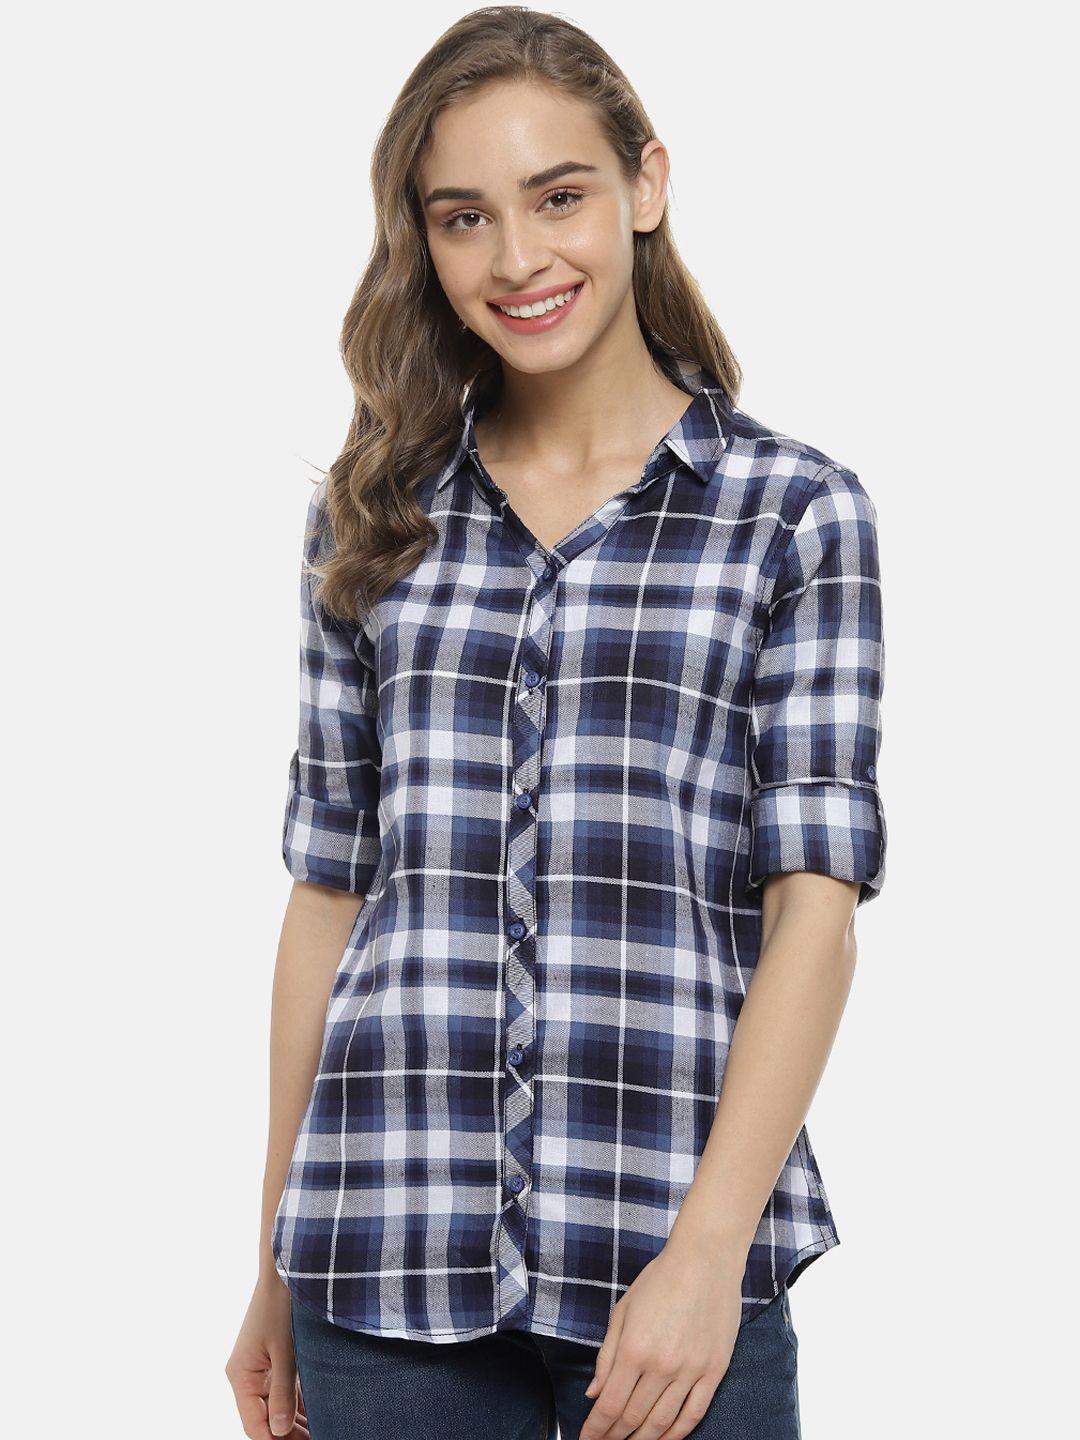 campus sutra women navy blue & white regular fit checked casual shirt